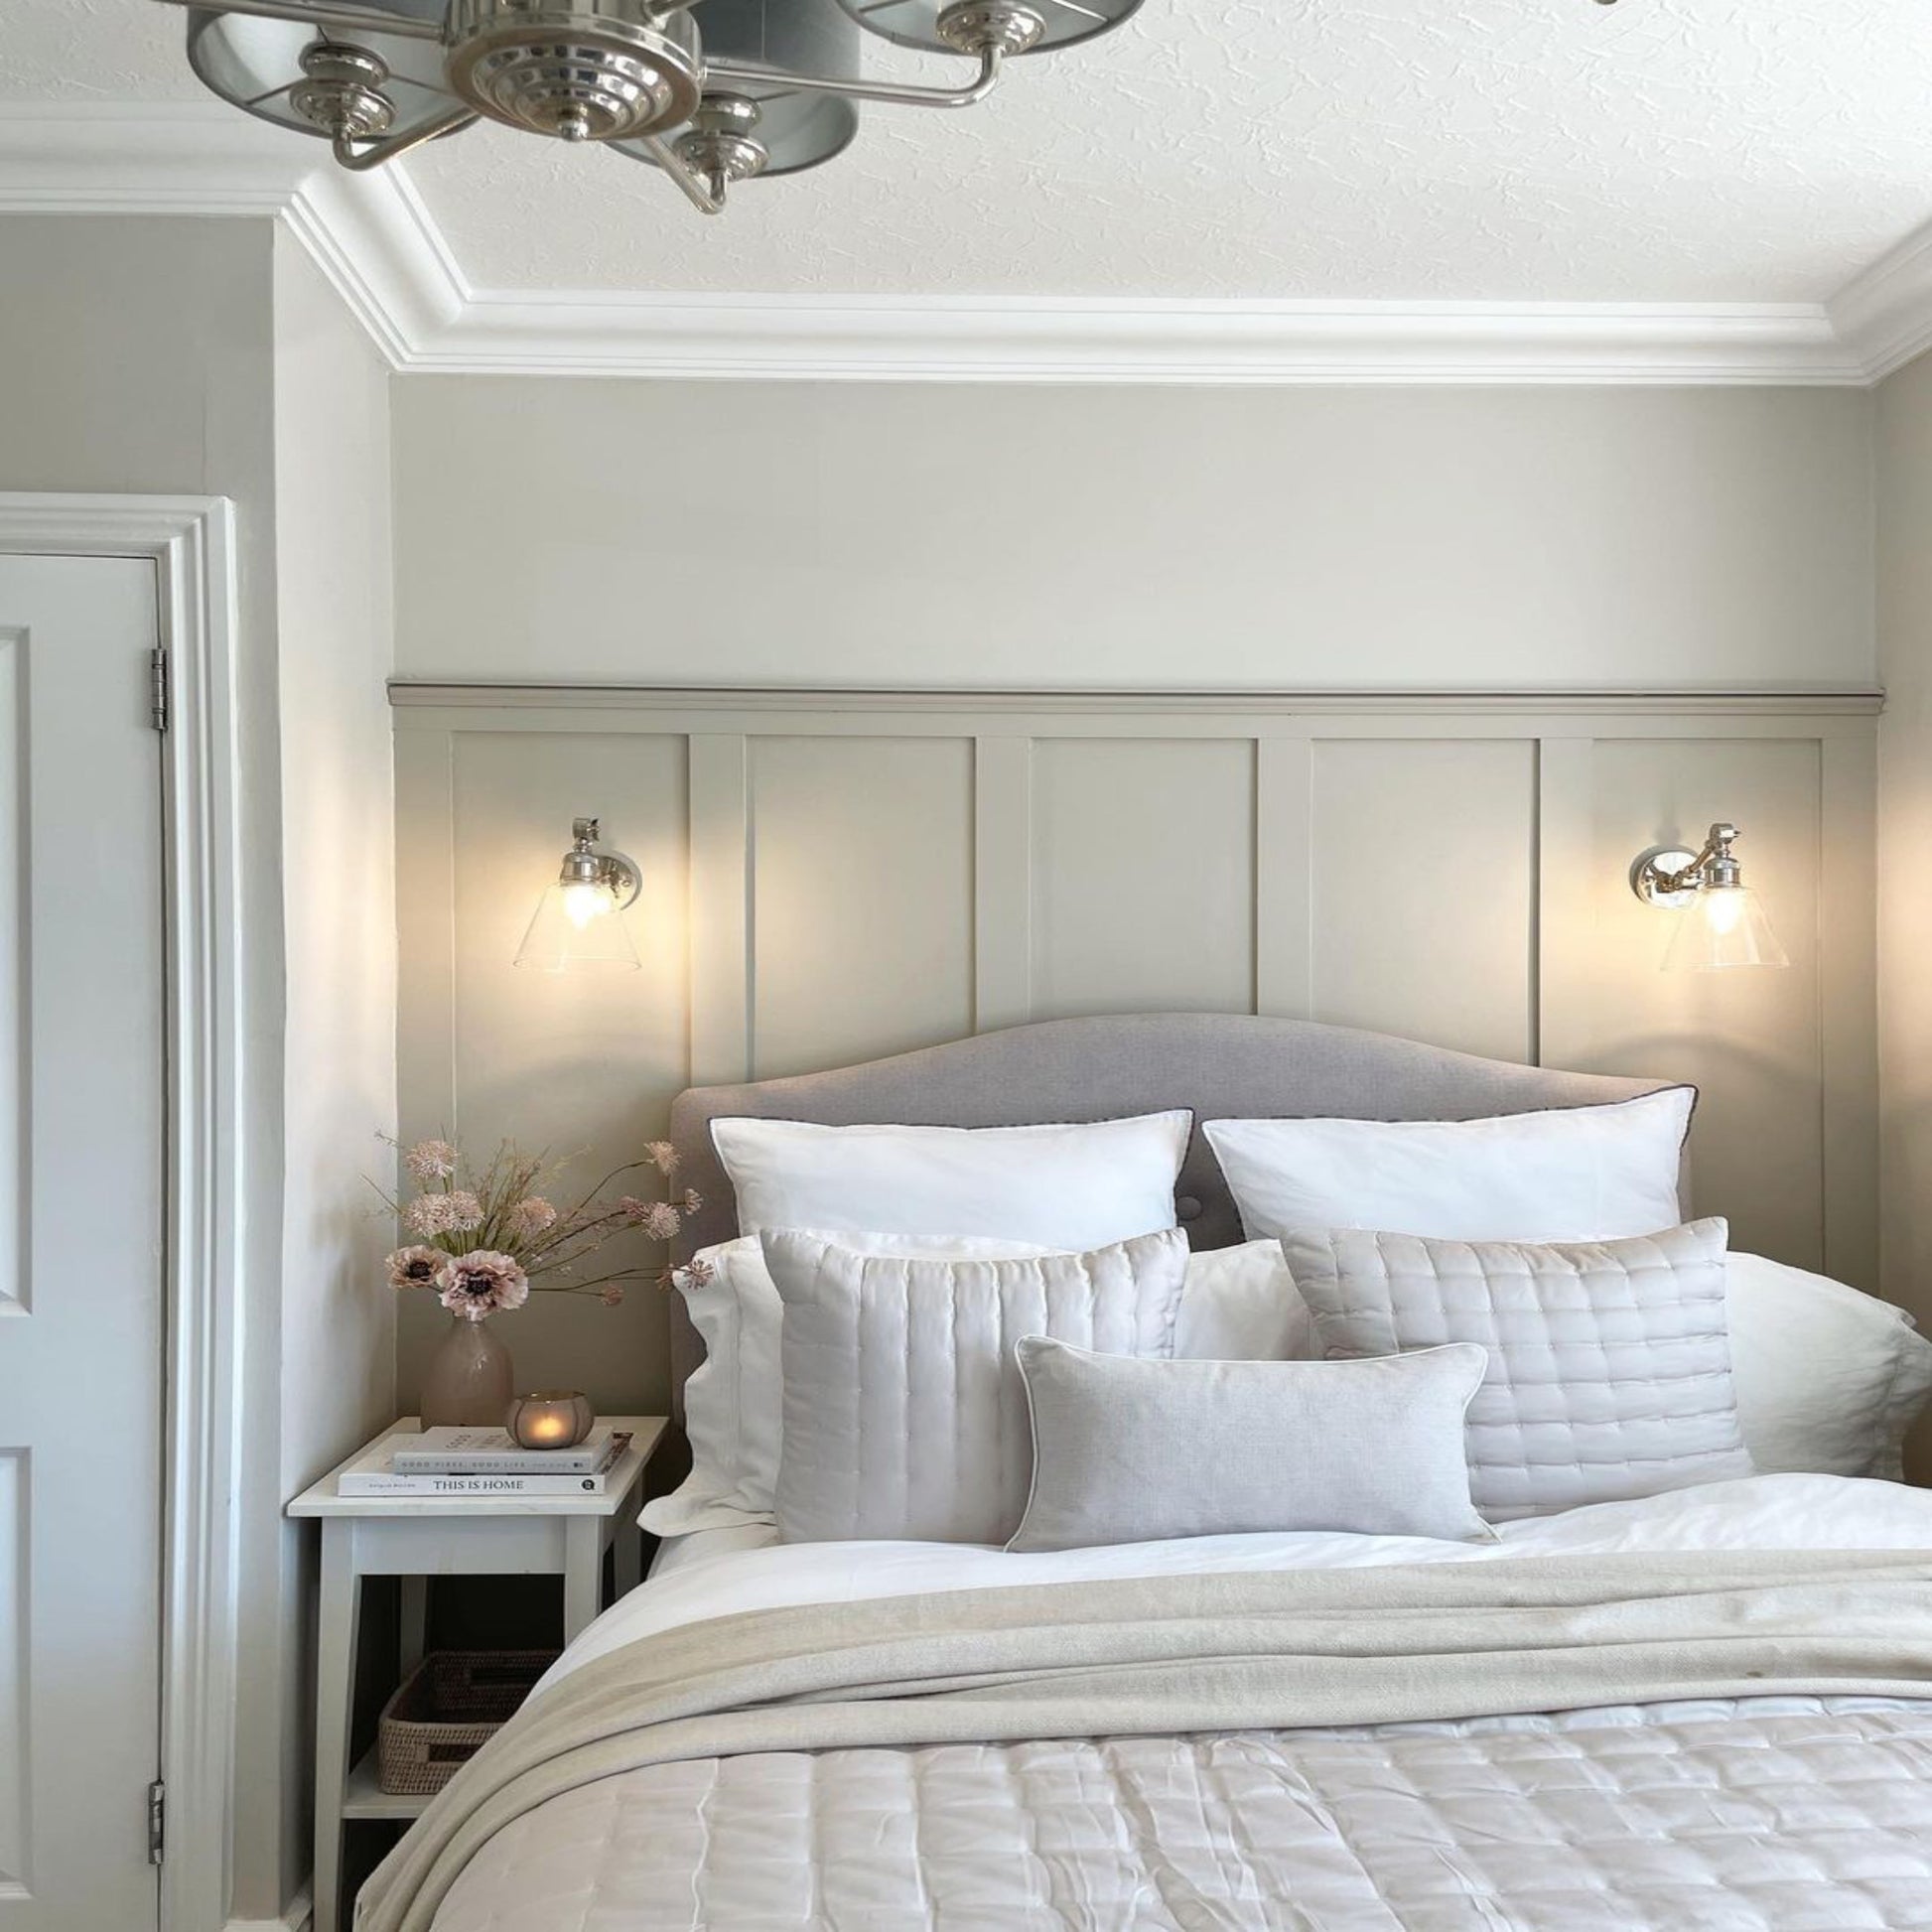 Ogee cornice in furnished bedroom